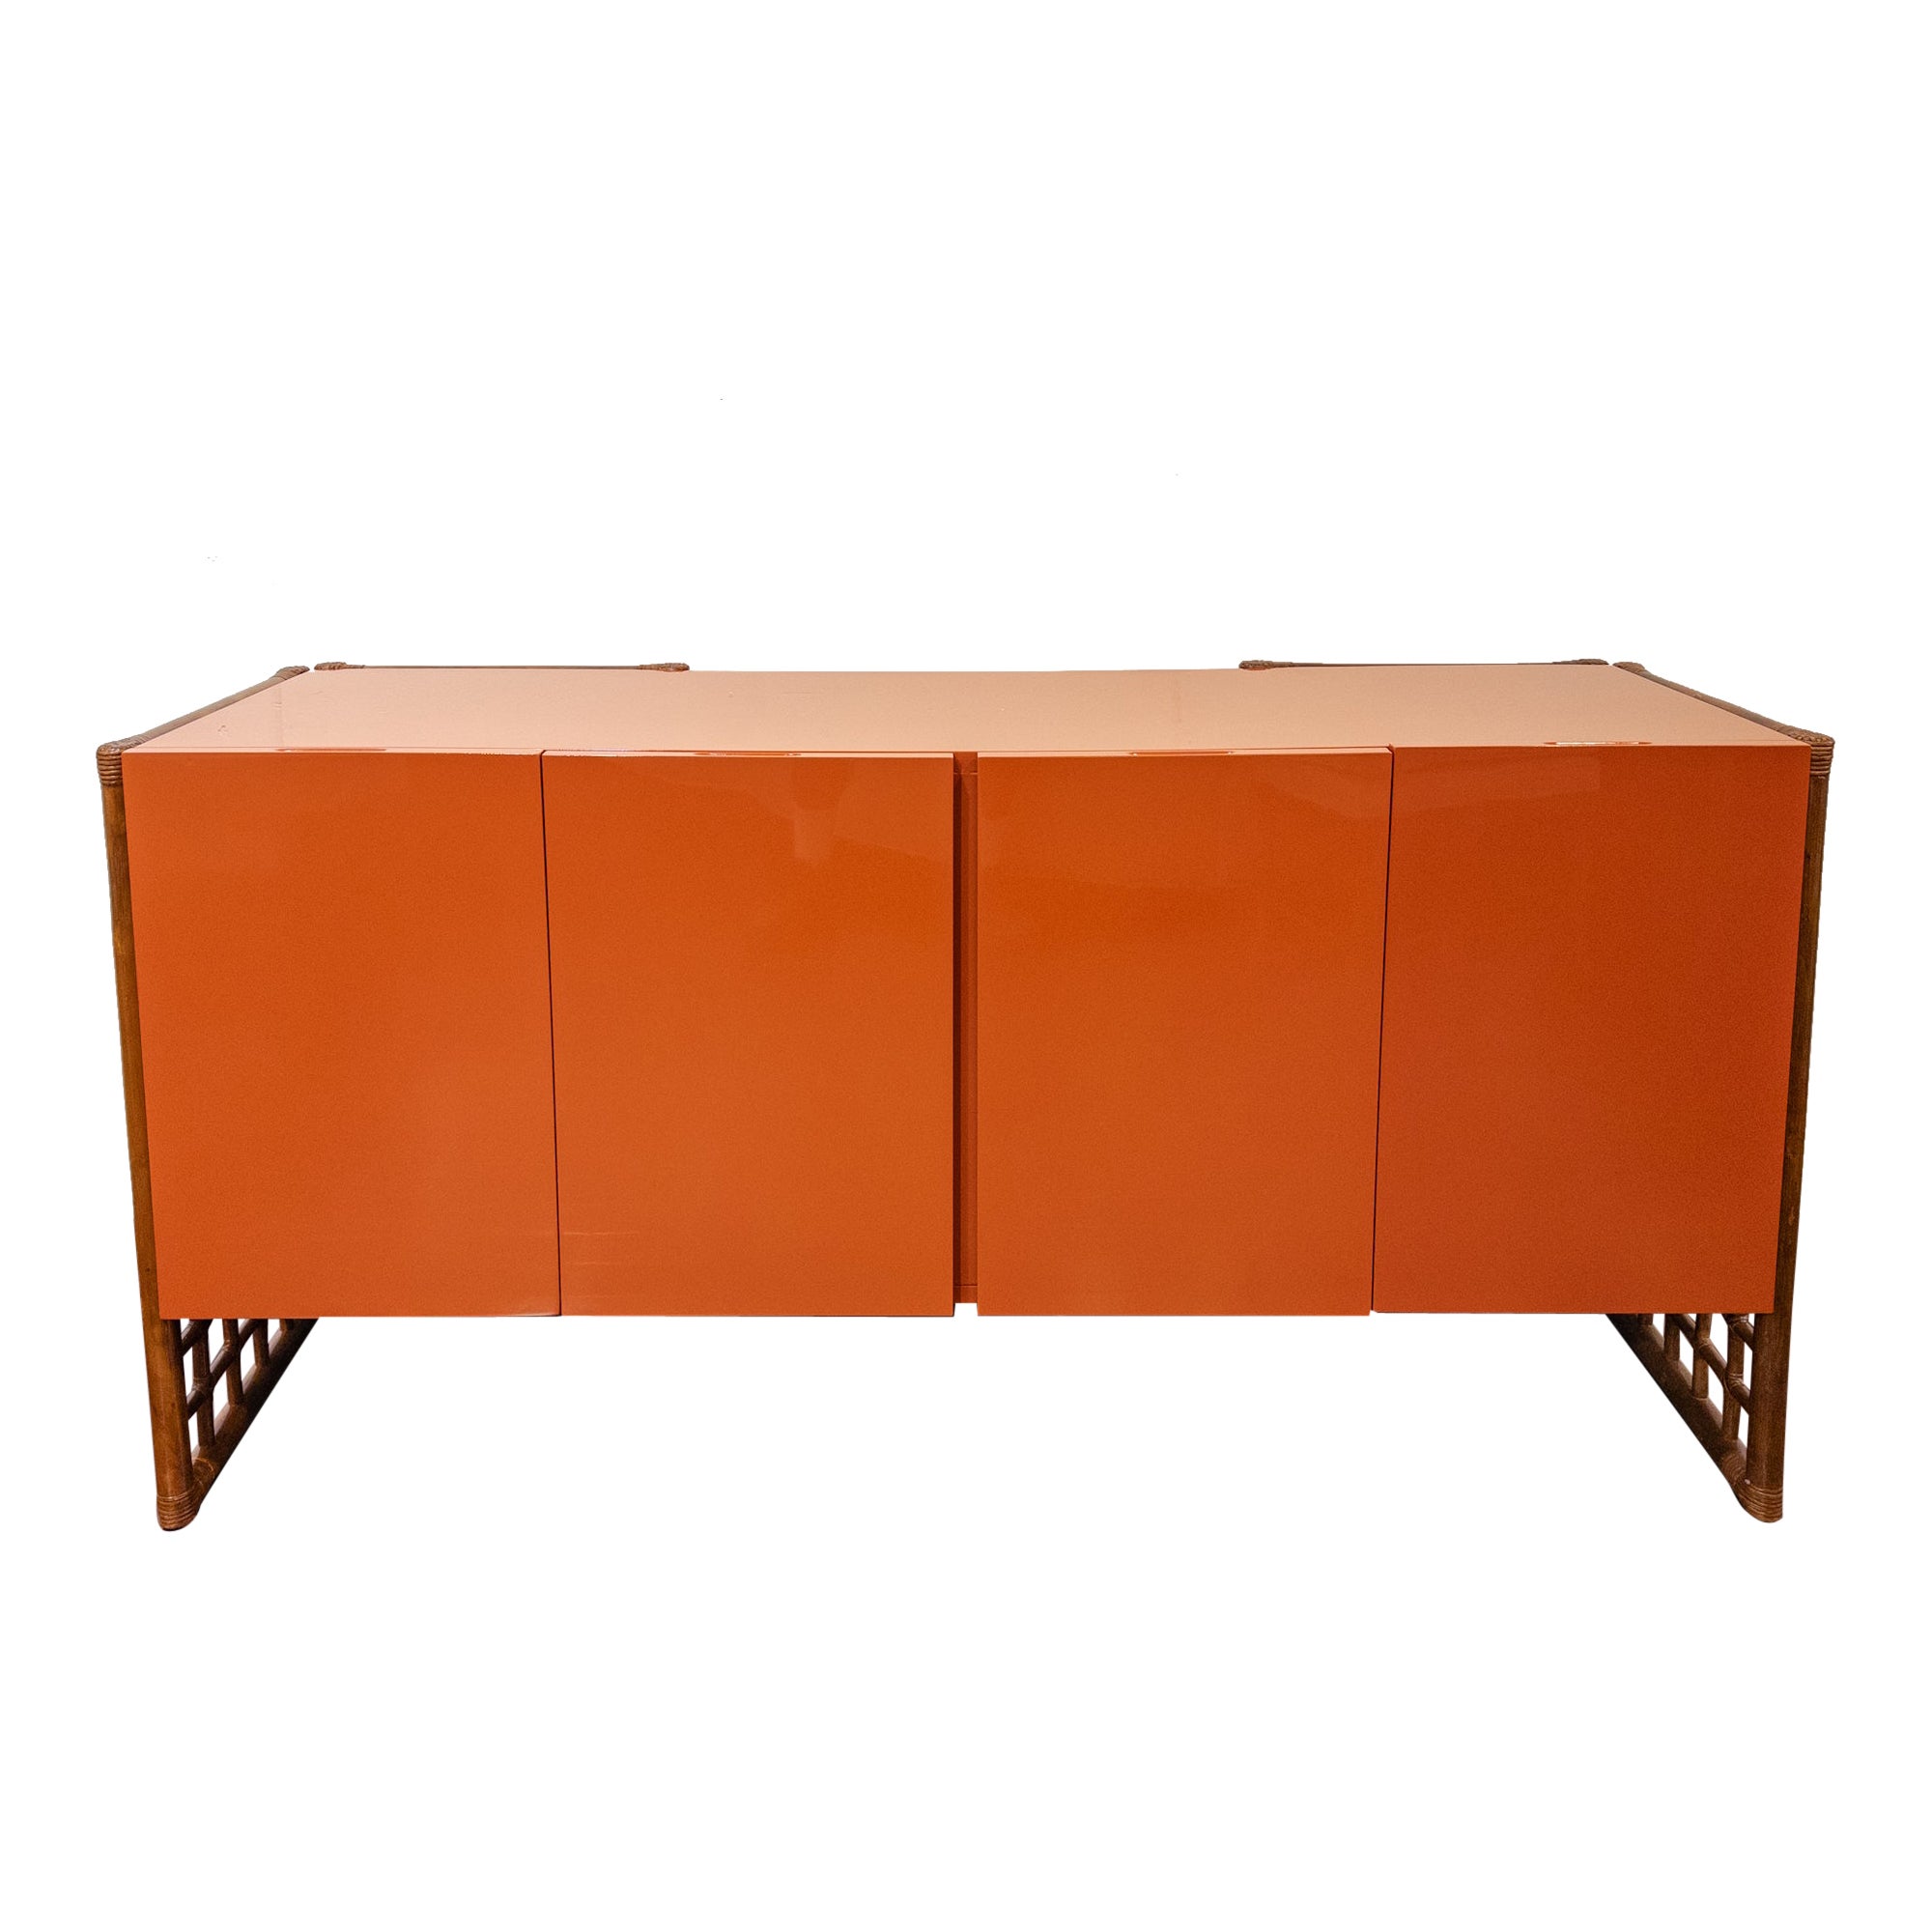 This rare Milo Baughman credenza, crafted for Thayer Coggin, exudes an exquisite allure that's hard to come by. Its lacquered finish gleams with a timeless elegance, showcasing Baughman's mastery of design. What sets this piece apart are its